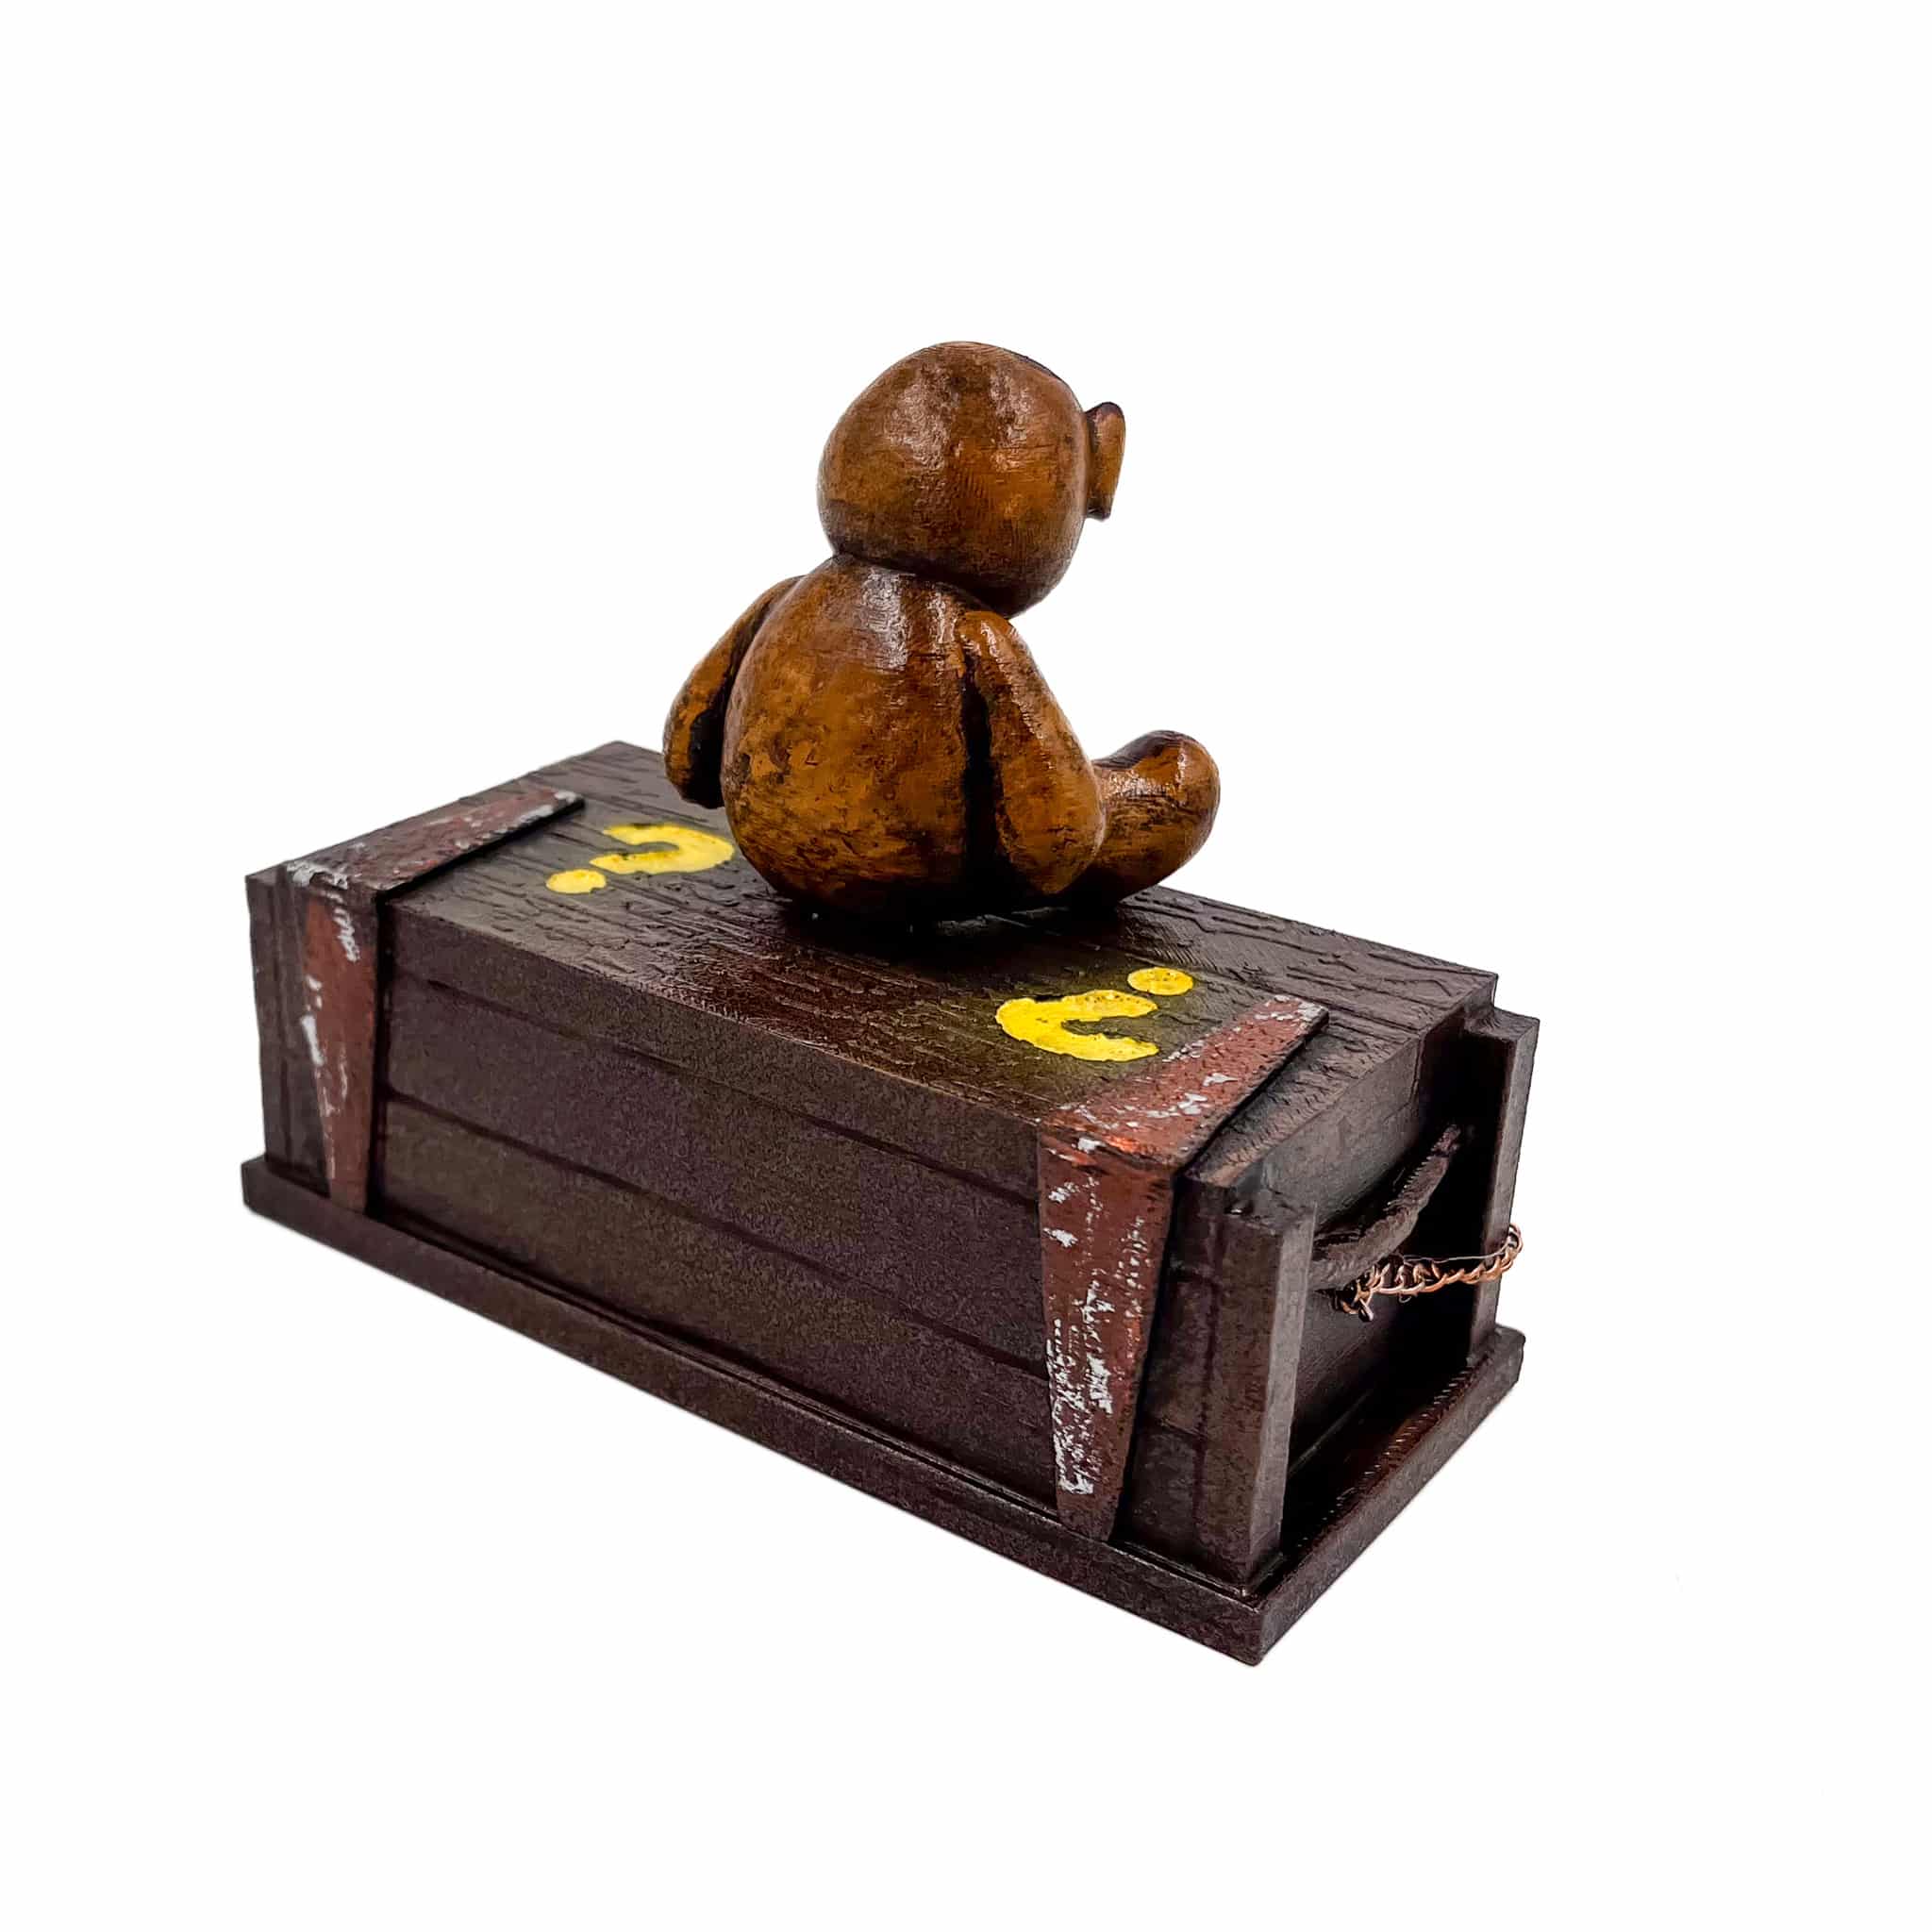 Embodying COD Zombies lore: Detailed Mystery Box and Teddy Bear Miniature